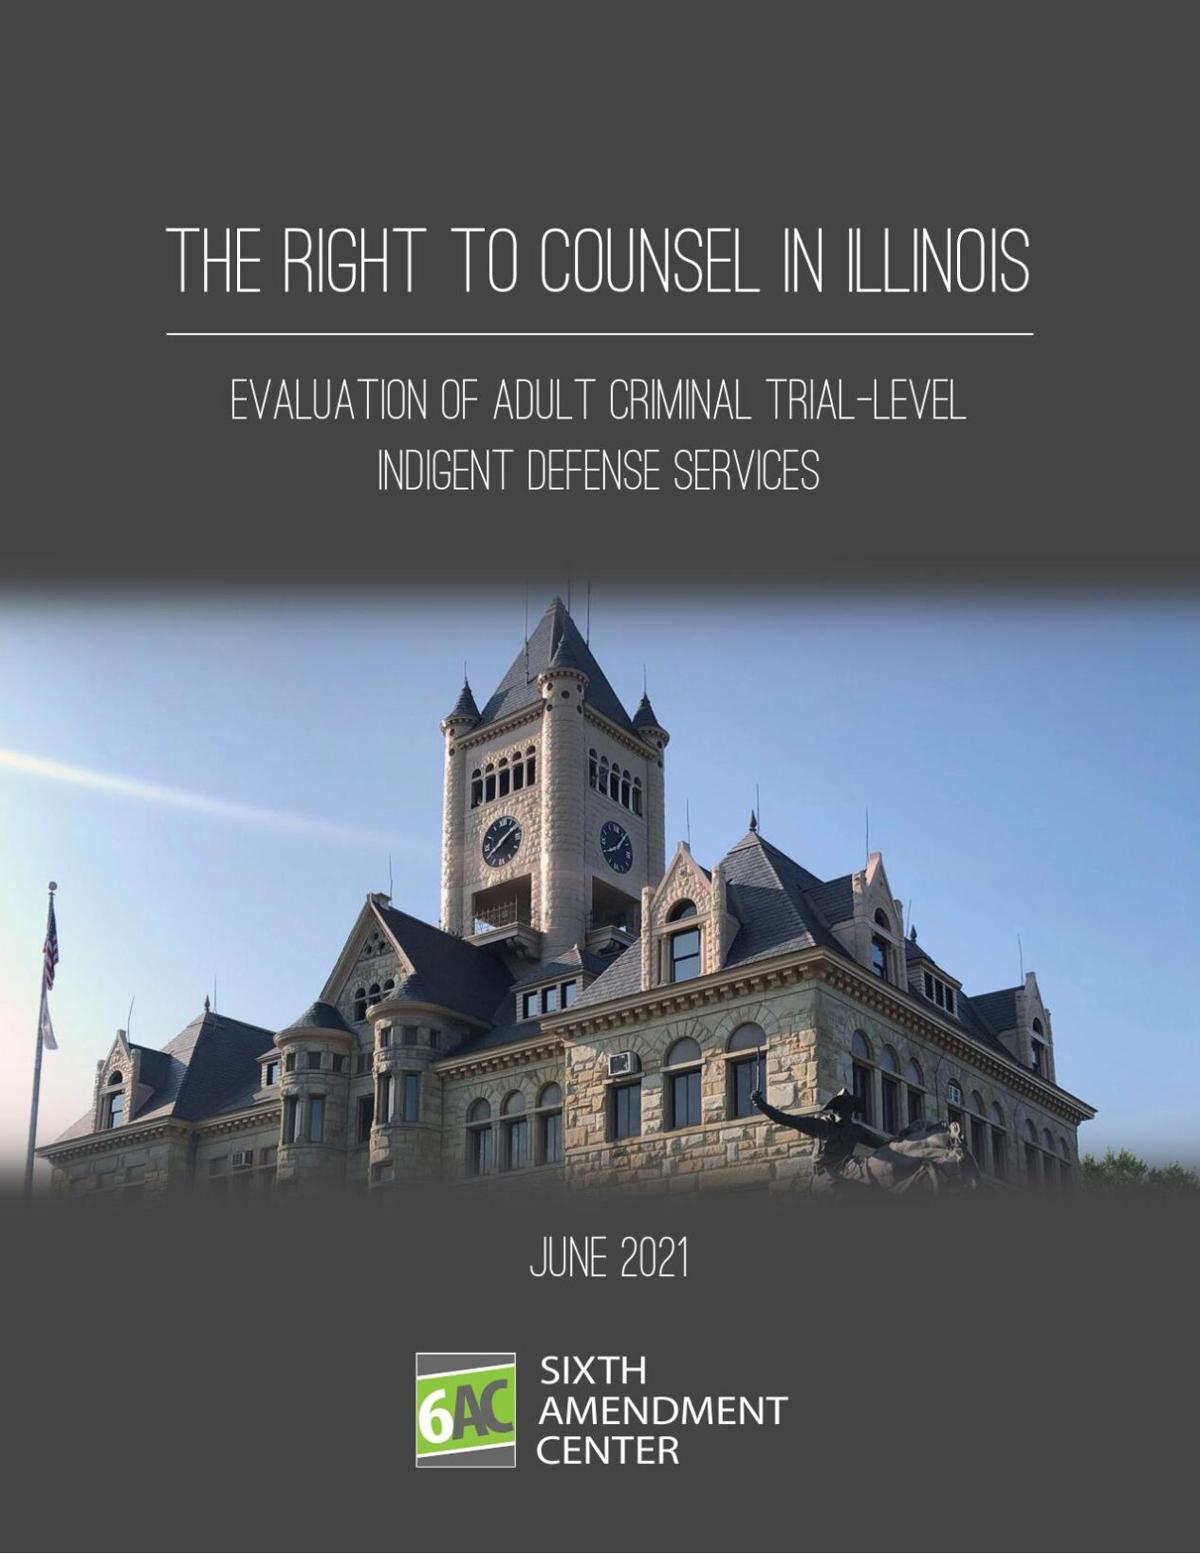 Tne Right to Counsel in Illinois